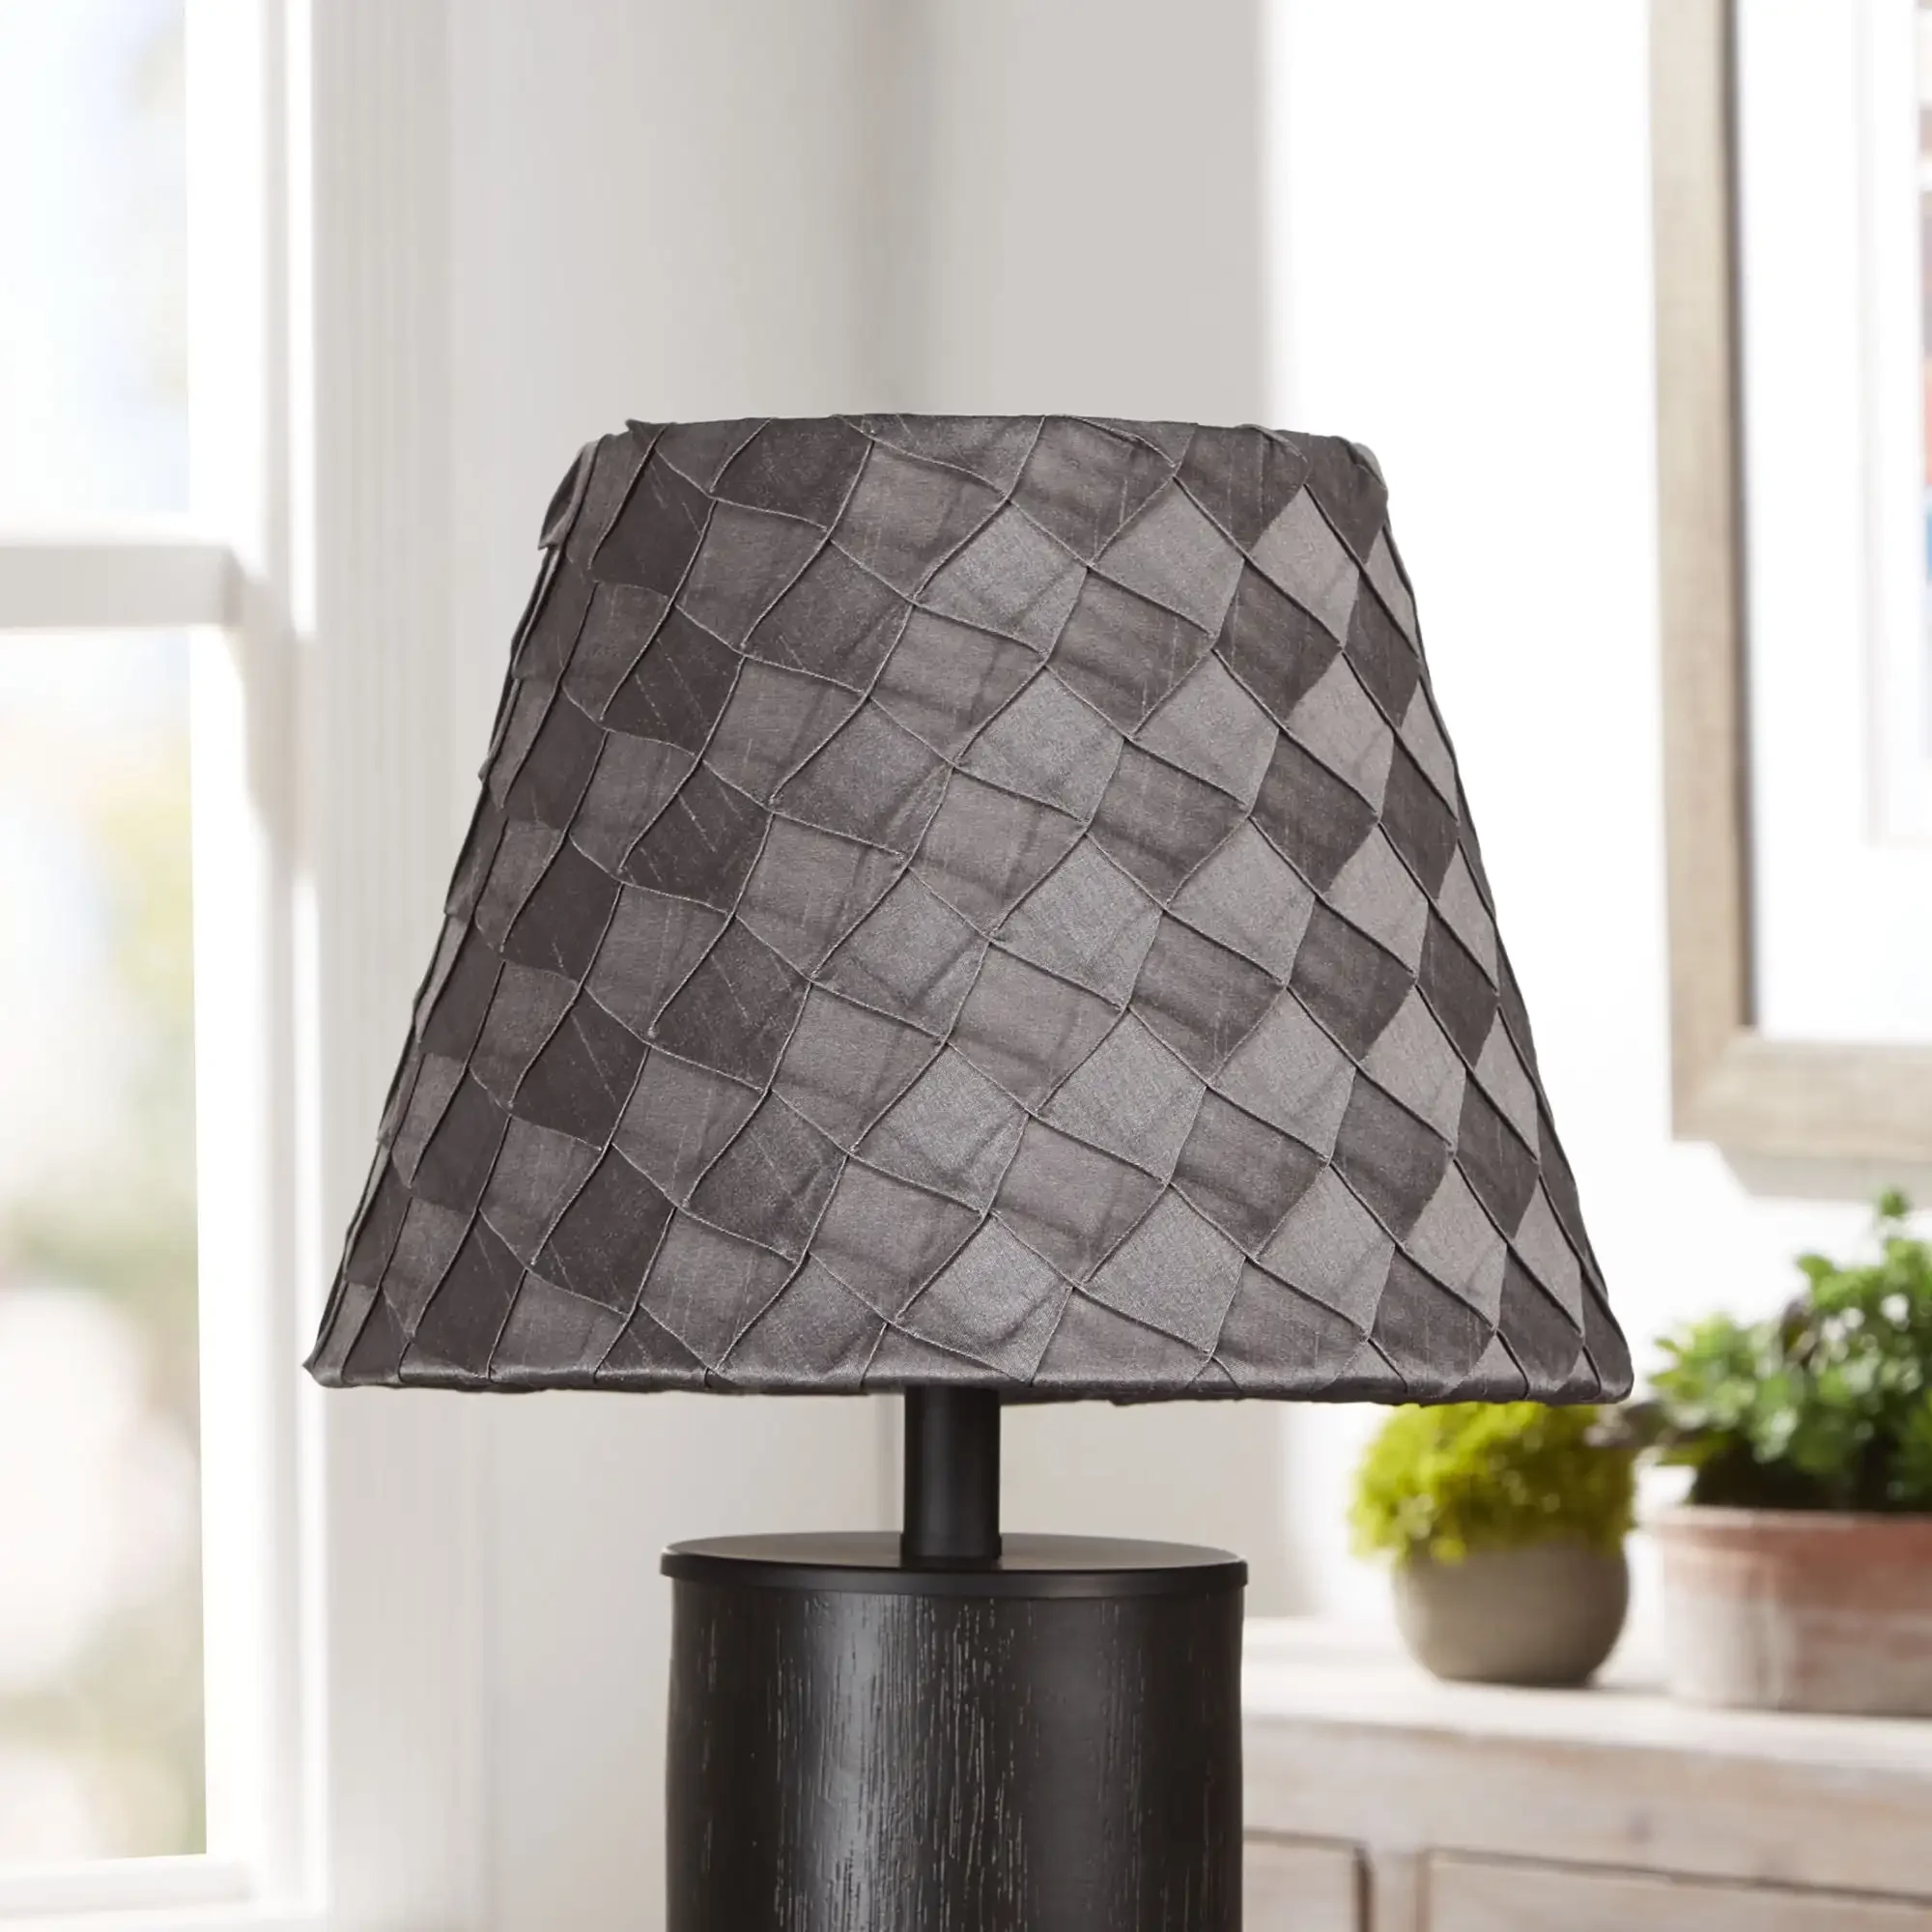 

Tapered Pleat Fabric Drum Accent Lamp Shade, Grey Rapid Transit Lamp Shades for Table Lamps Light Cover